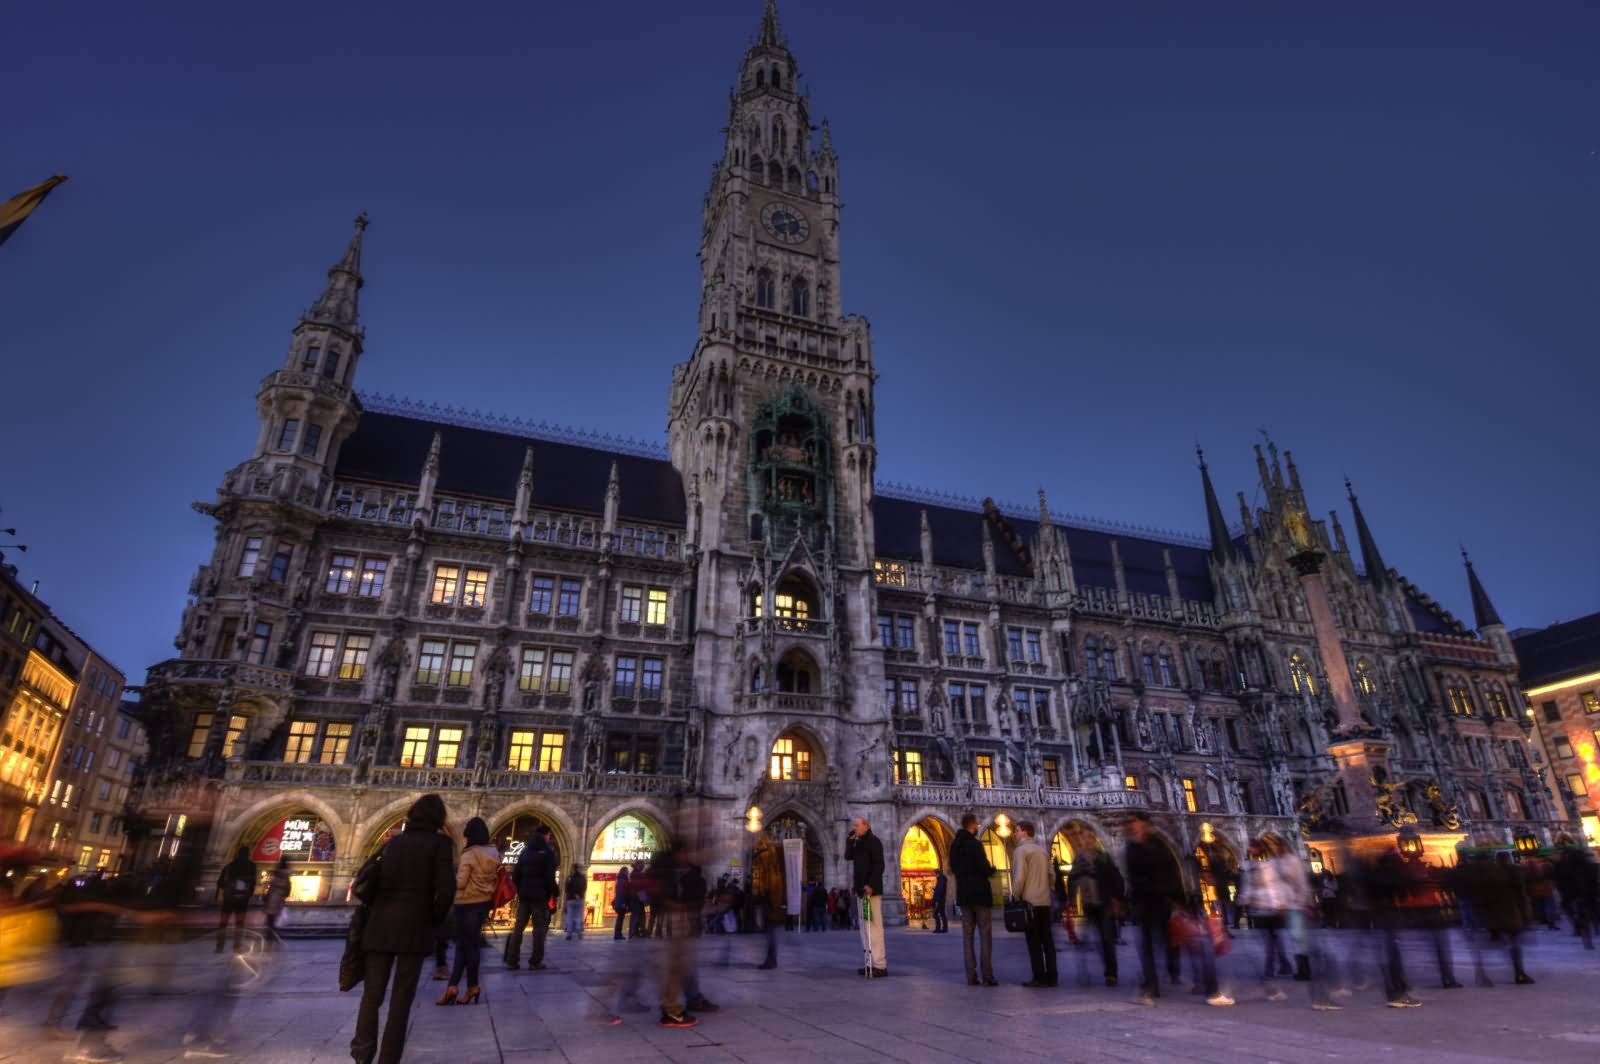 The Neues Rathaus New Town Hall Of Munich At Night